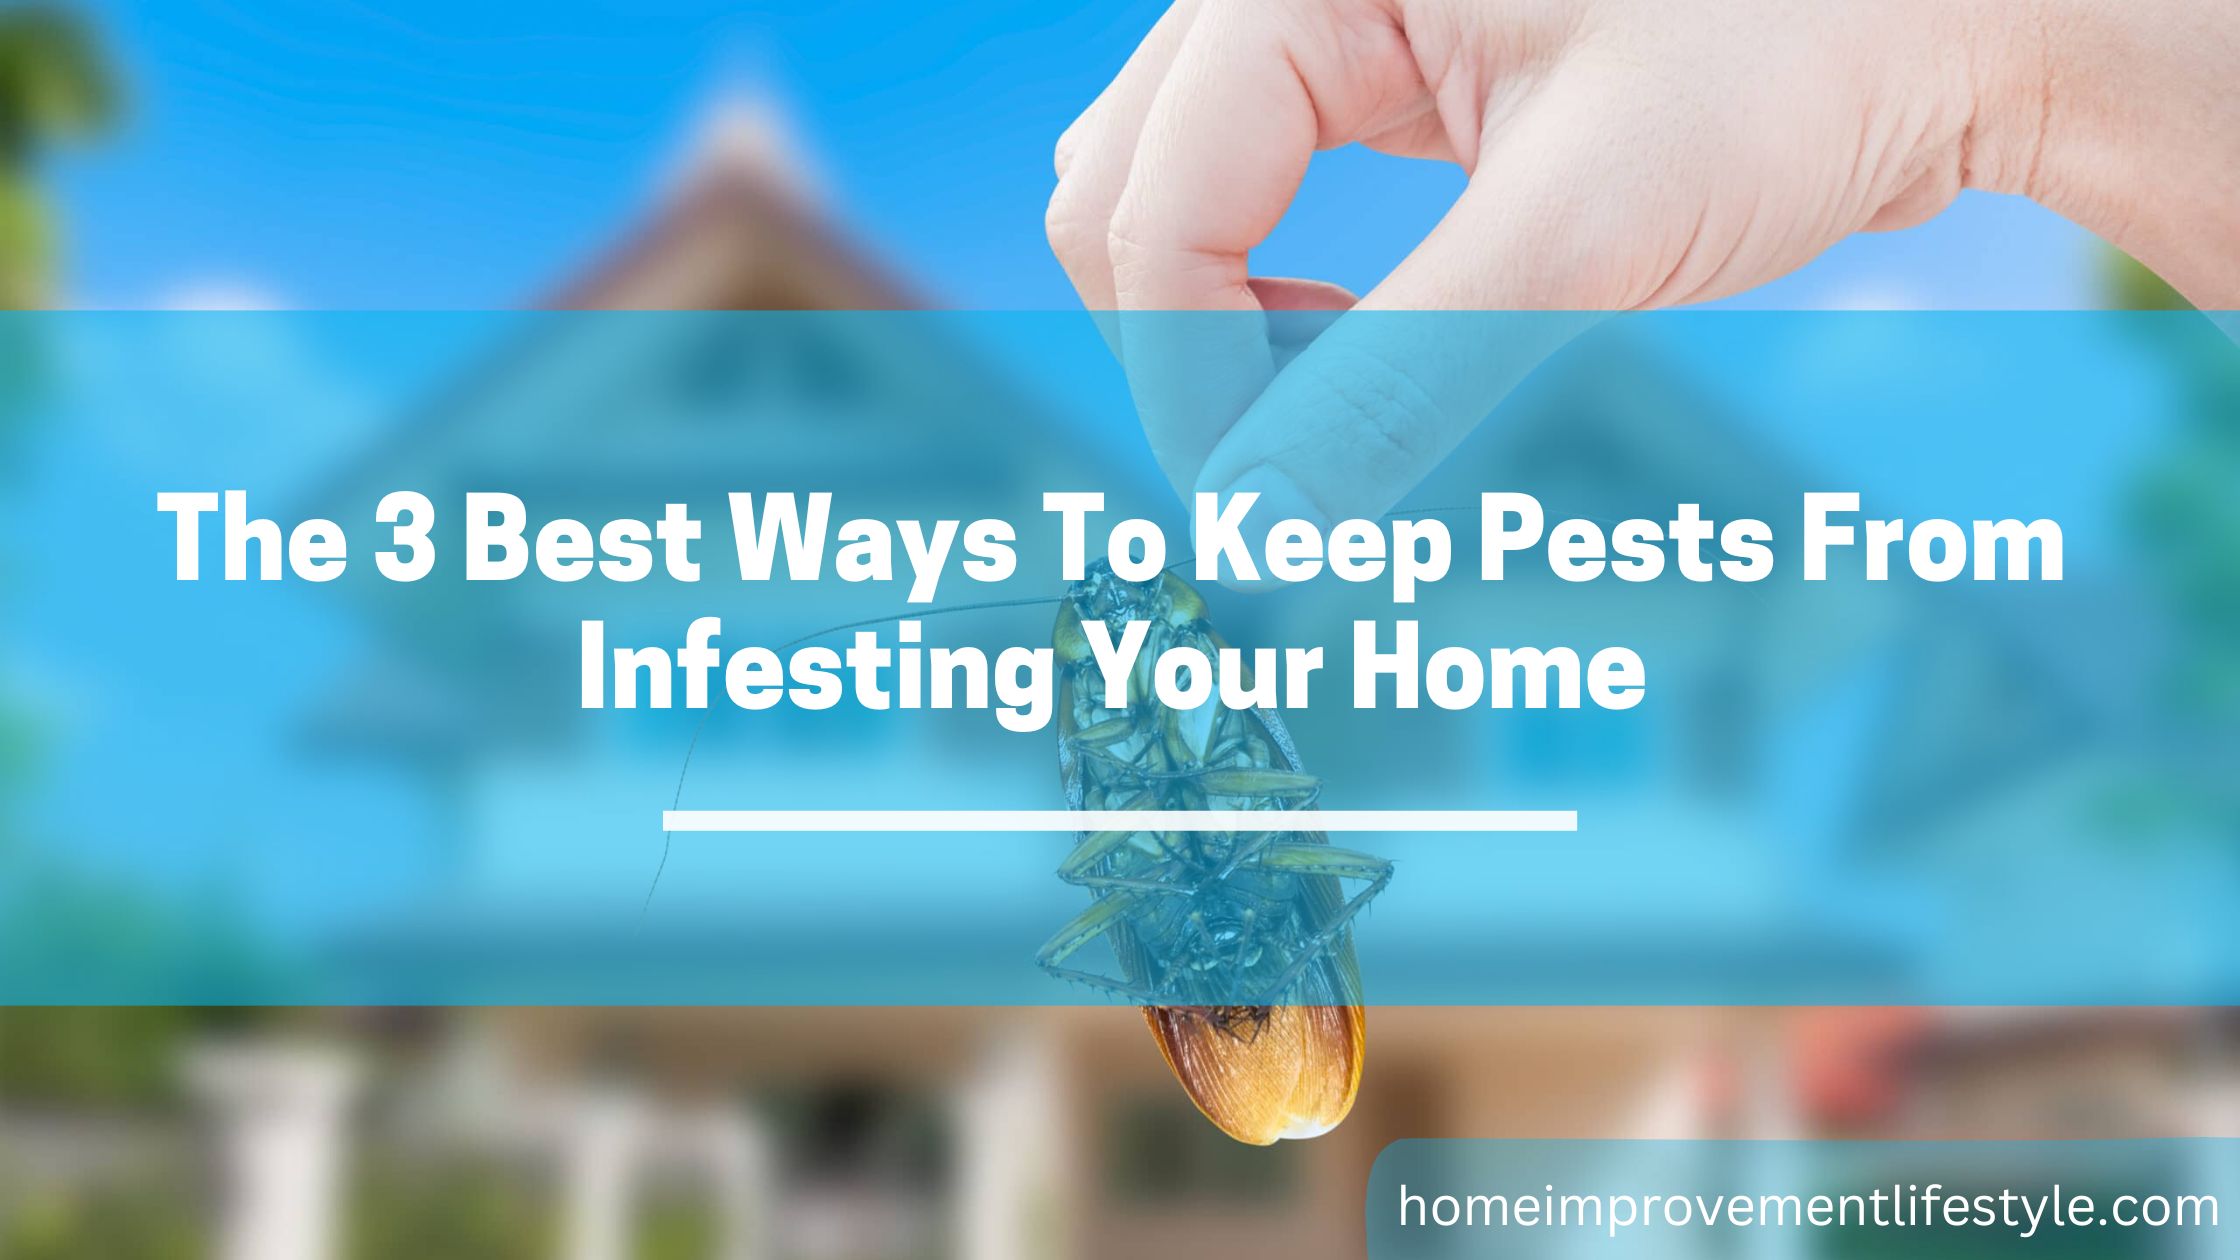 The 3 Best Ways To Keep Pests From Infesting Your Home